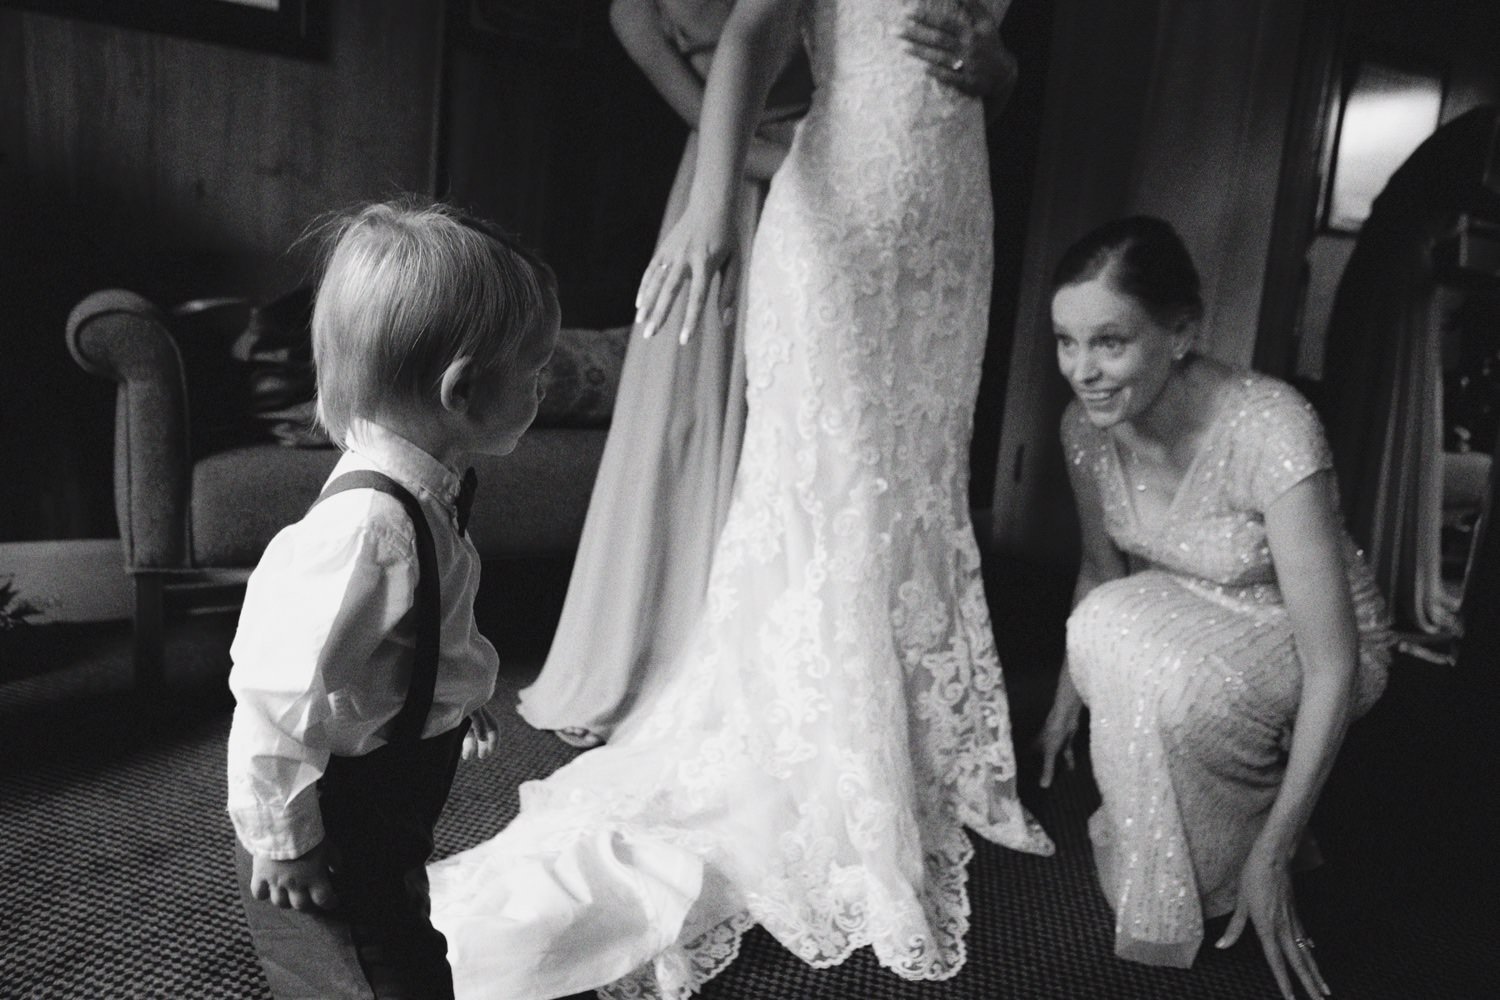  toddler boy stands in front of bride getting into dress 